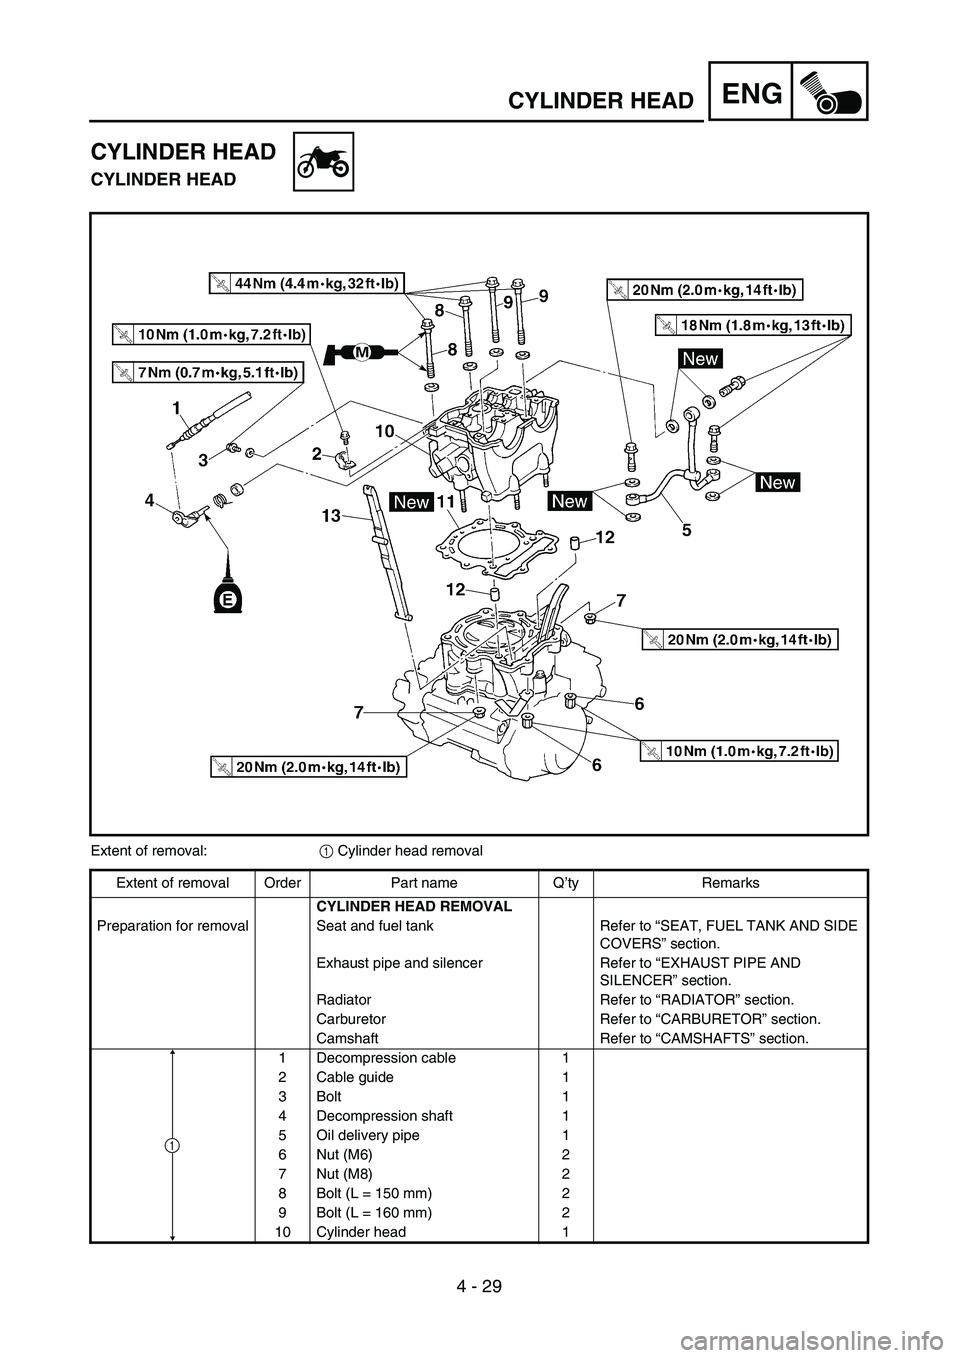 YAMAHA WR 426F 2002  Manuale de Empleo (in Spanish) ENG
4 - 29
CYLINDER HEAD
CYLINDER HEAD
CYLINDER HEAD
Extent of removal:1 Cylinder head removal
Extent of removal Order Part name Q’ty Remarks
CYLINDER HEAD REMOVAL
Preparation for removal Seat and f